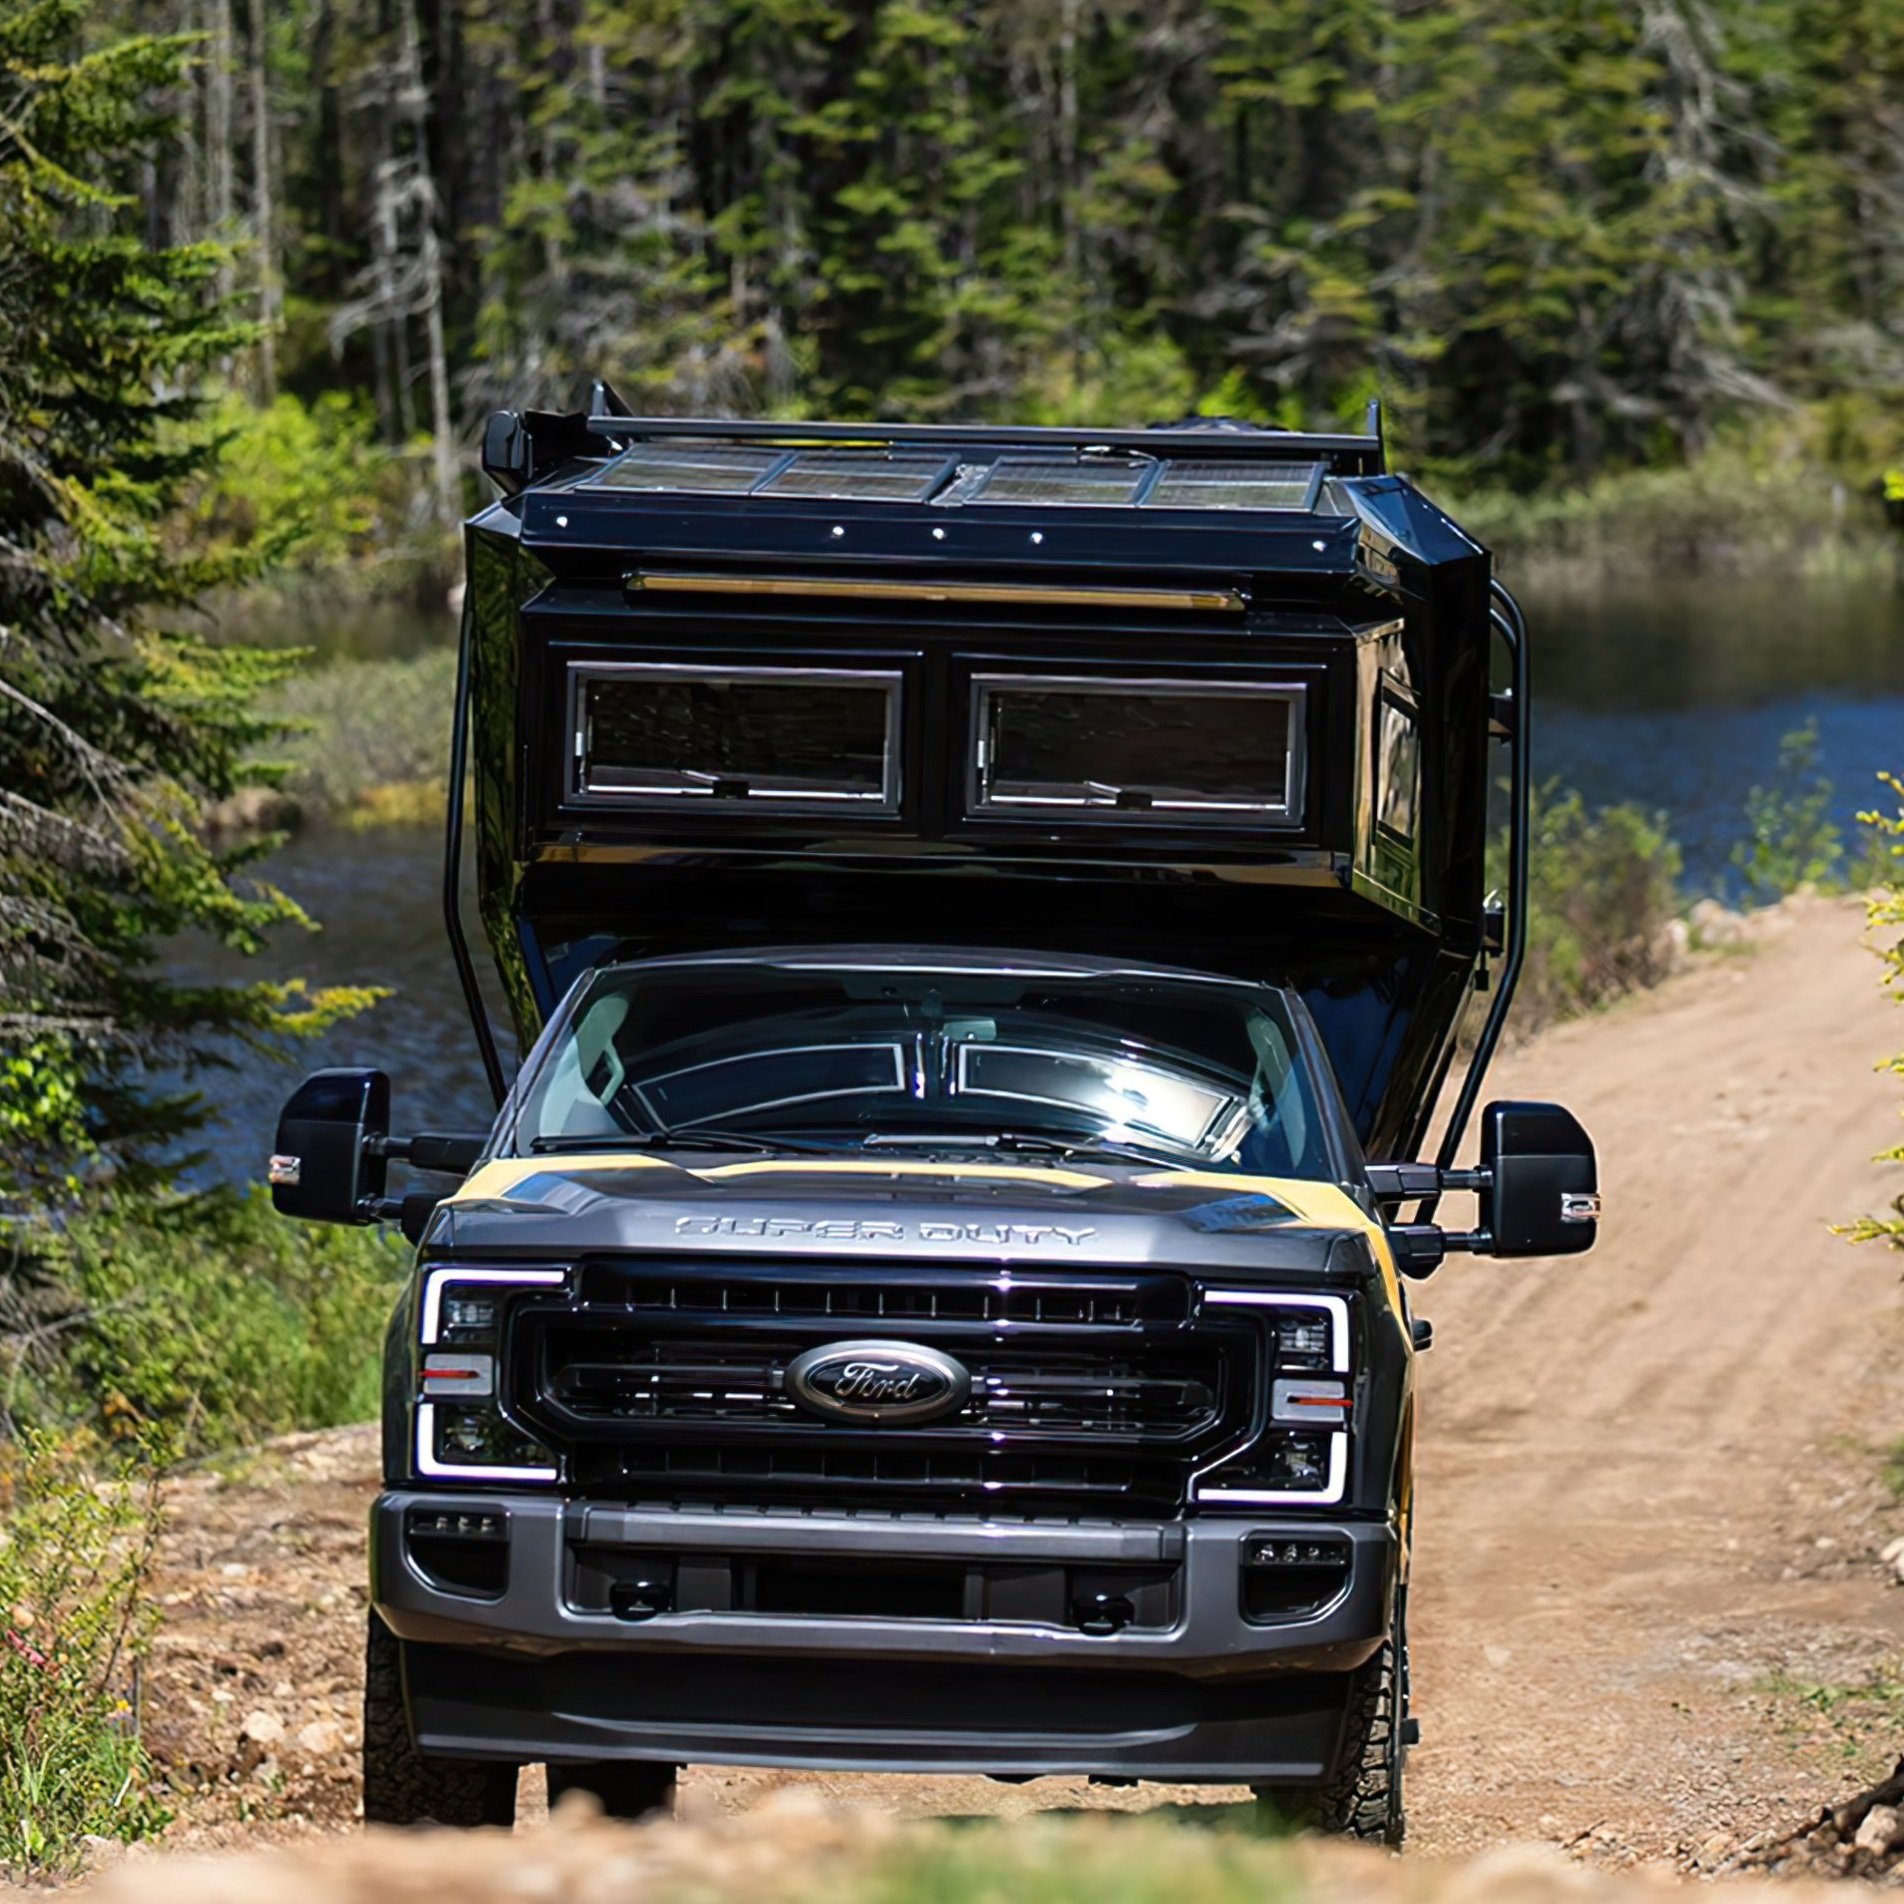  Located on the West Coast of Canada, Loki Basecamp has operated within the design, engineer, and fabrication business for over 15 years. They say they combine personal interests with professional expertise, and we’re excited to see the product.  Tha